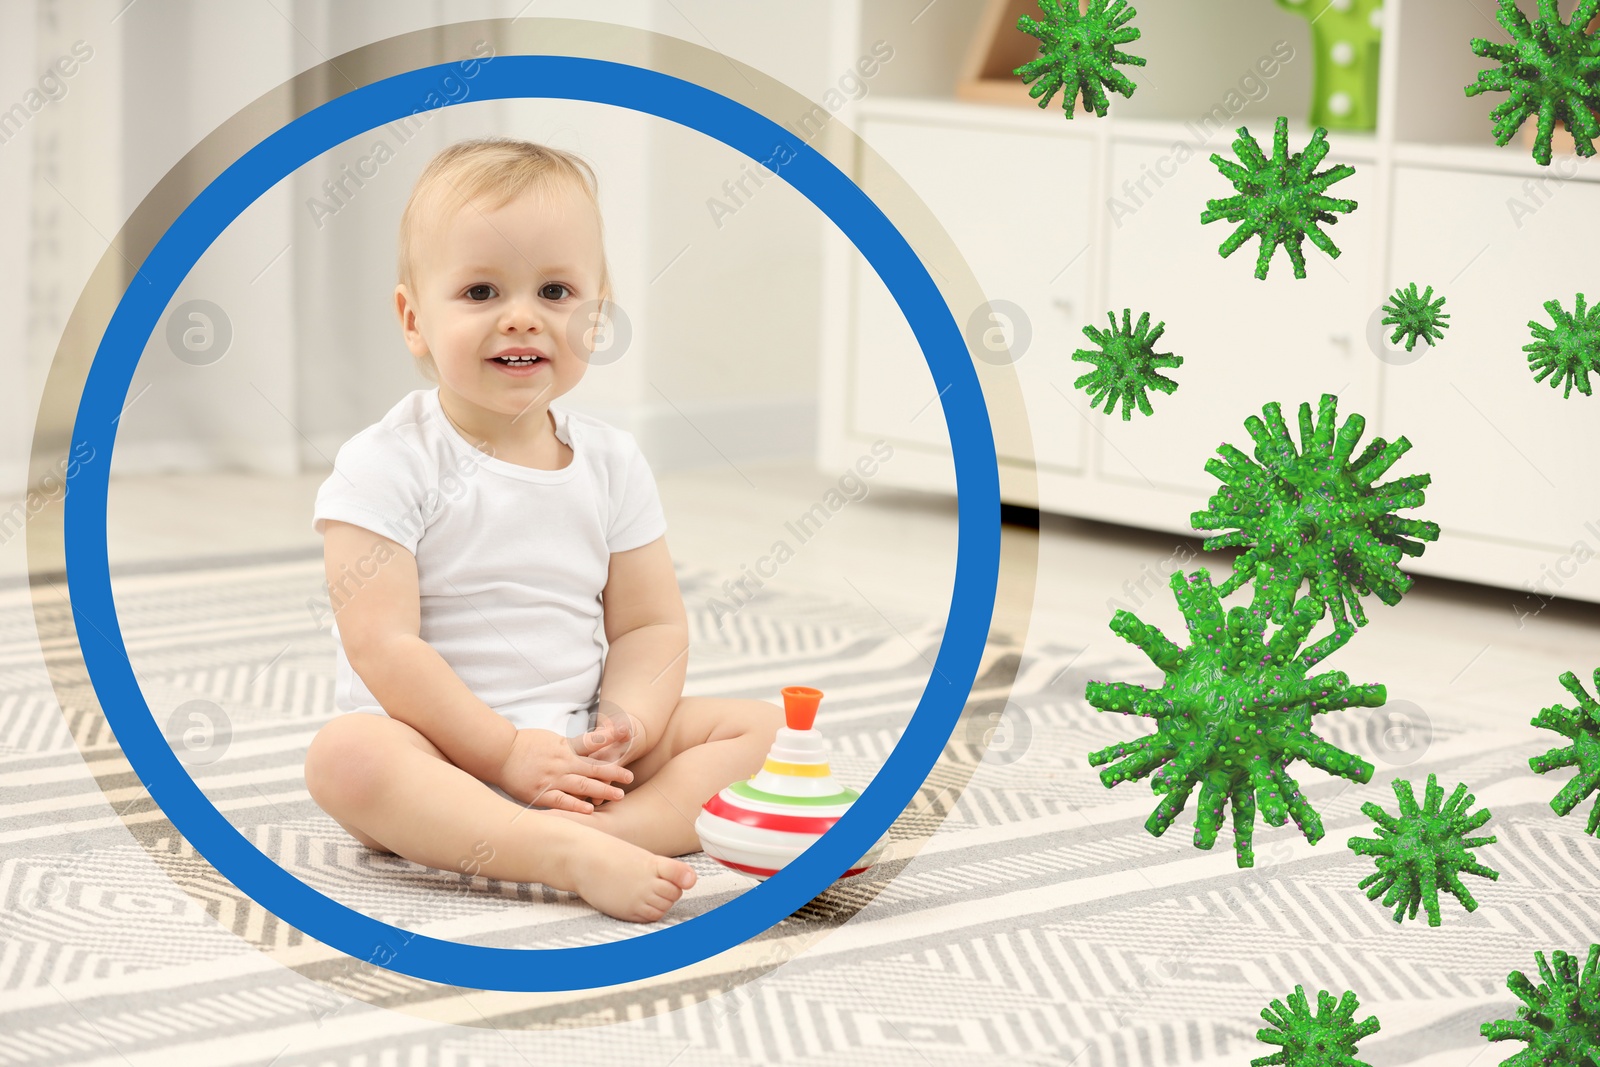 Illustration of Cute little child with strong immunity sitting on floor at home. Circle around her symbolizing shield blocking viruses, illustration